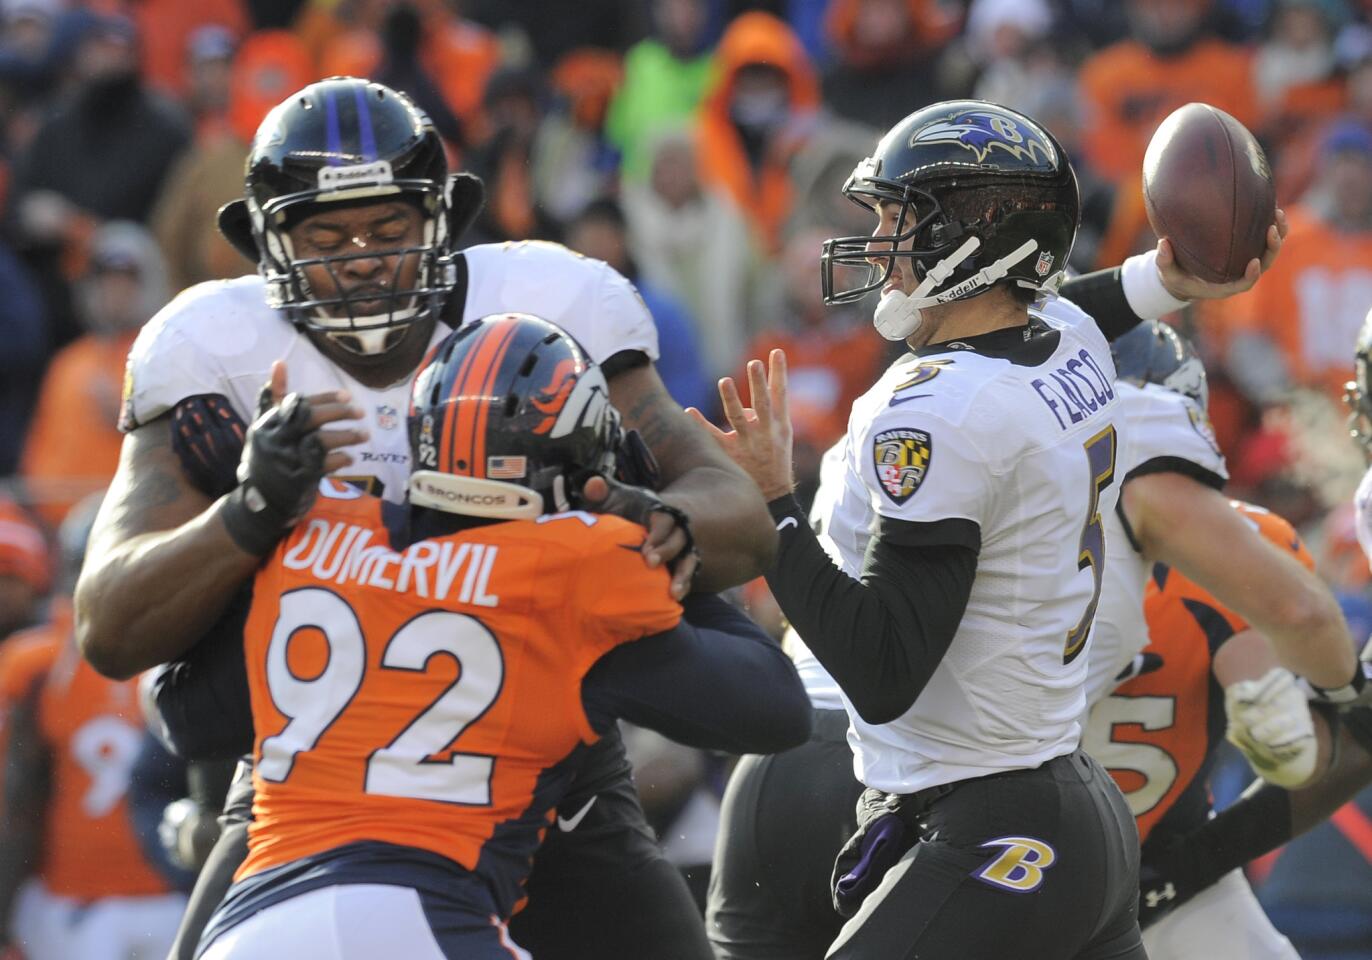 Ravens OT Bryant McKinnie blocks Elvis Dumervil as he pursues Joe Flacco. The Ravens agreed to terms on a five-year, $35 million deal with the former Denver Broncos defensive end.